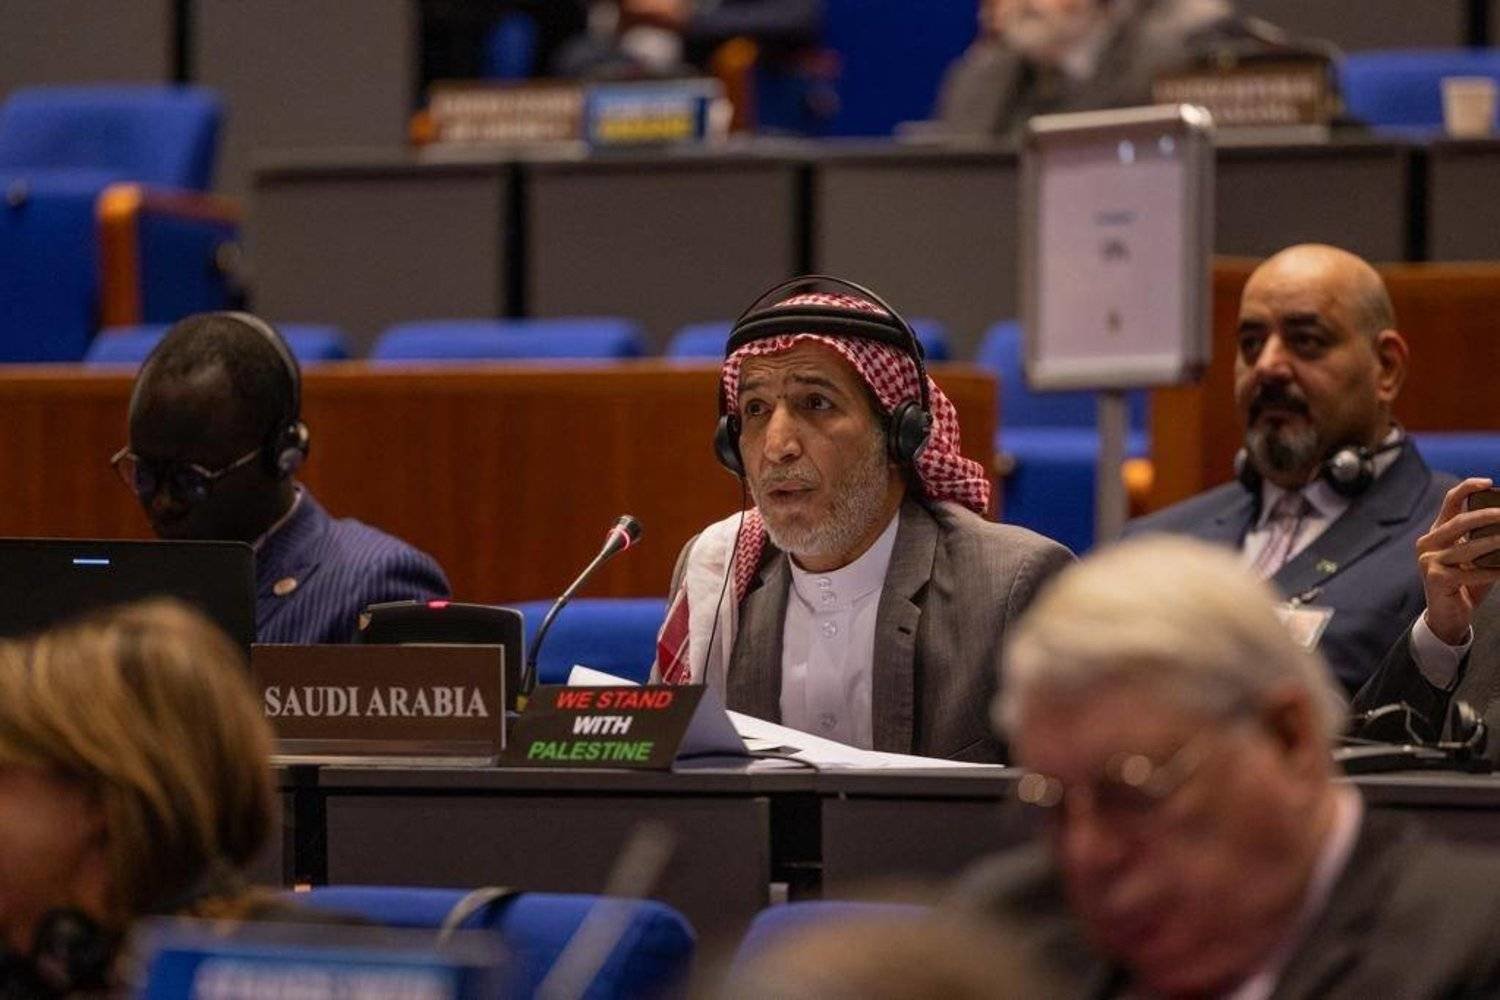 Saudi Ambassador to the Netherlands and the Kingdom’s Permanent Representative to the Organization for the Prohibition of Chemical Weapons Ziad Al-Atiya delivers his remarks at the conference in The Hague. (SPA)